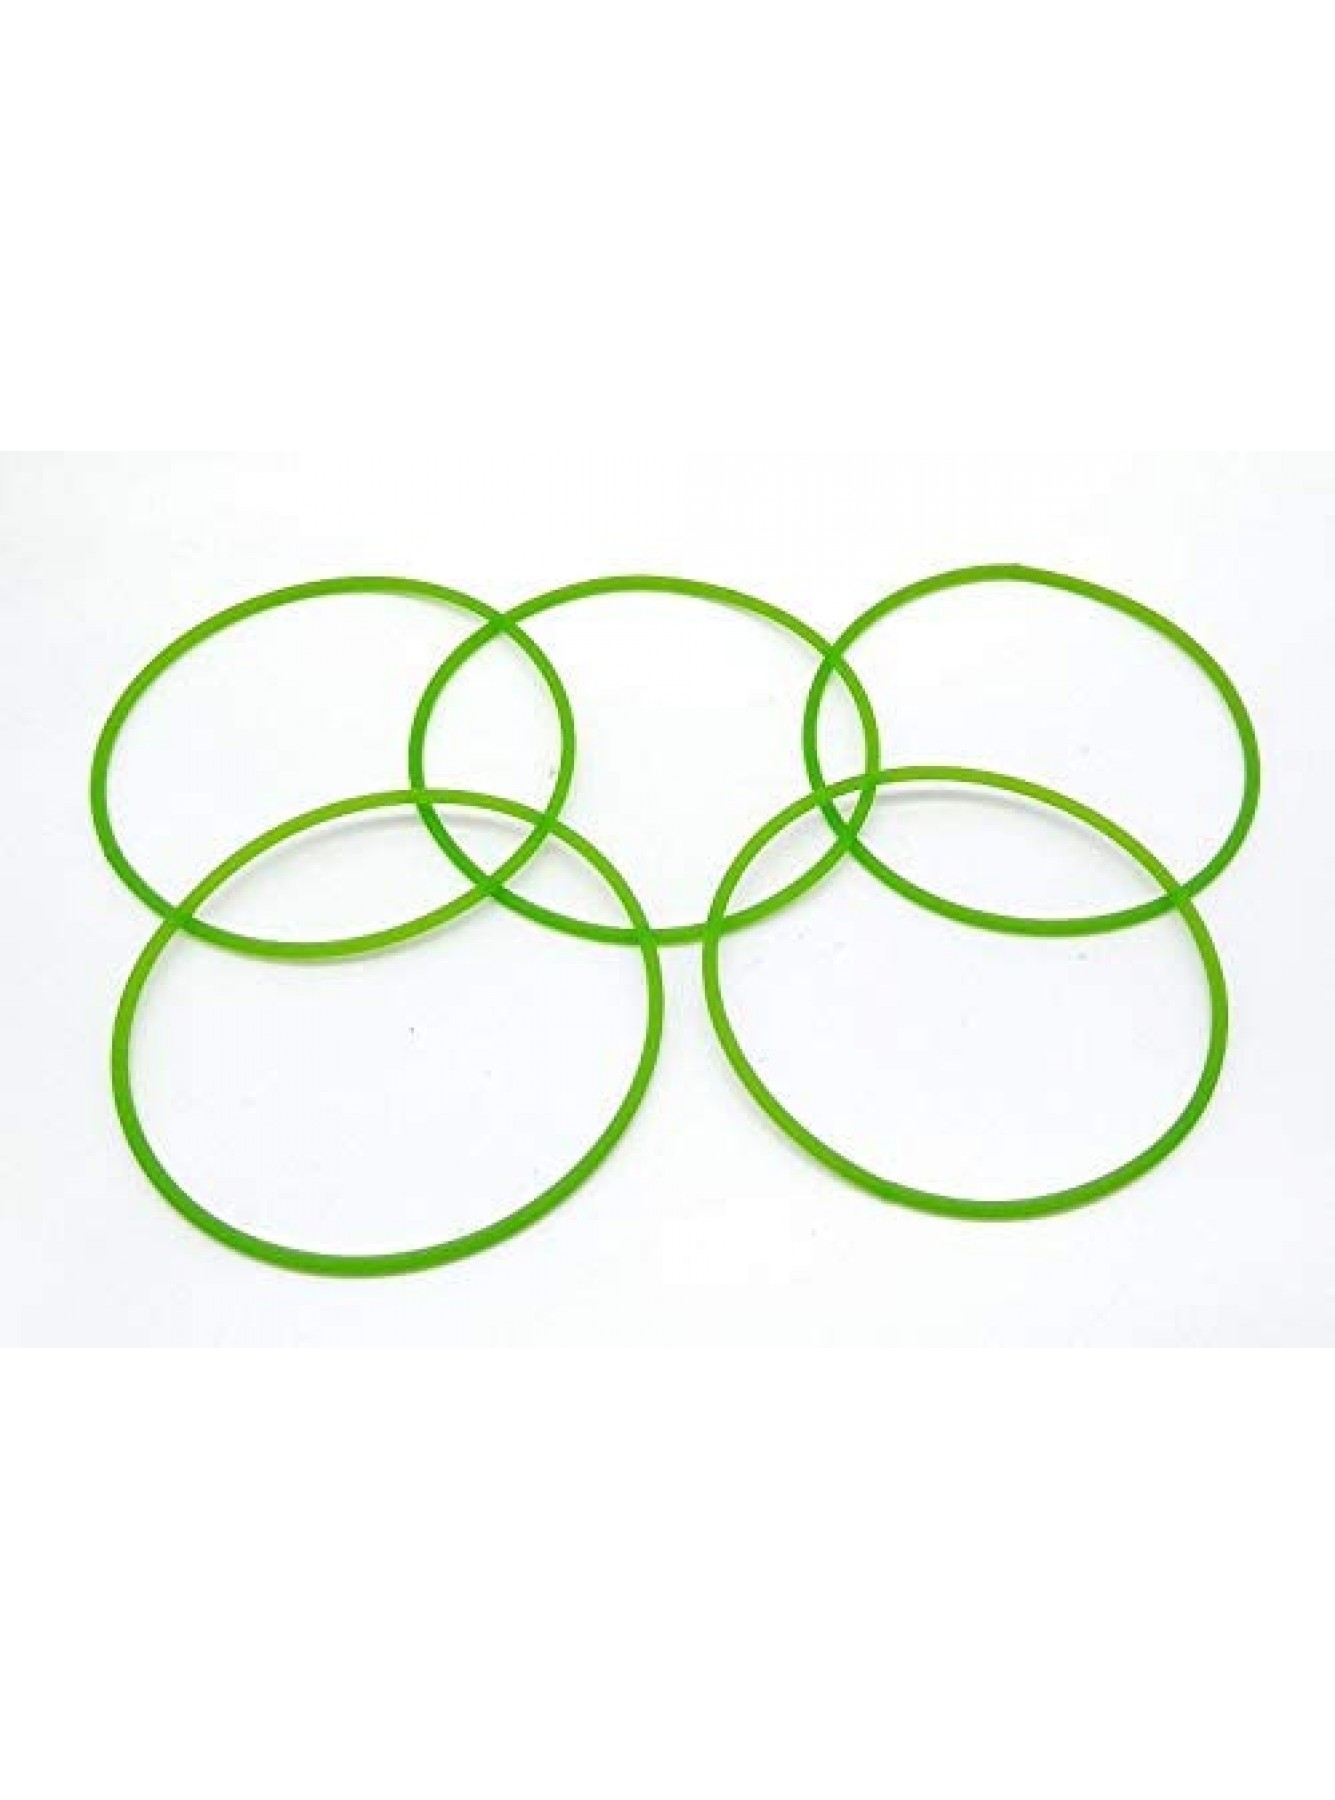 Tool Parts NEW 5pc Rubber Belt for Electric Commercial Candy Floss Cotton Machine Cotton candy machine ET Color: GREEN B081VM9NNY